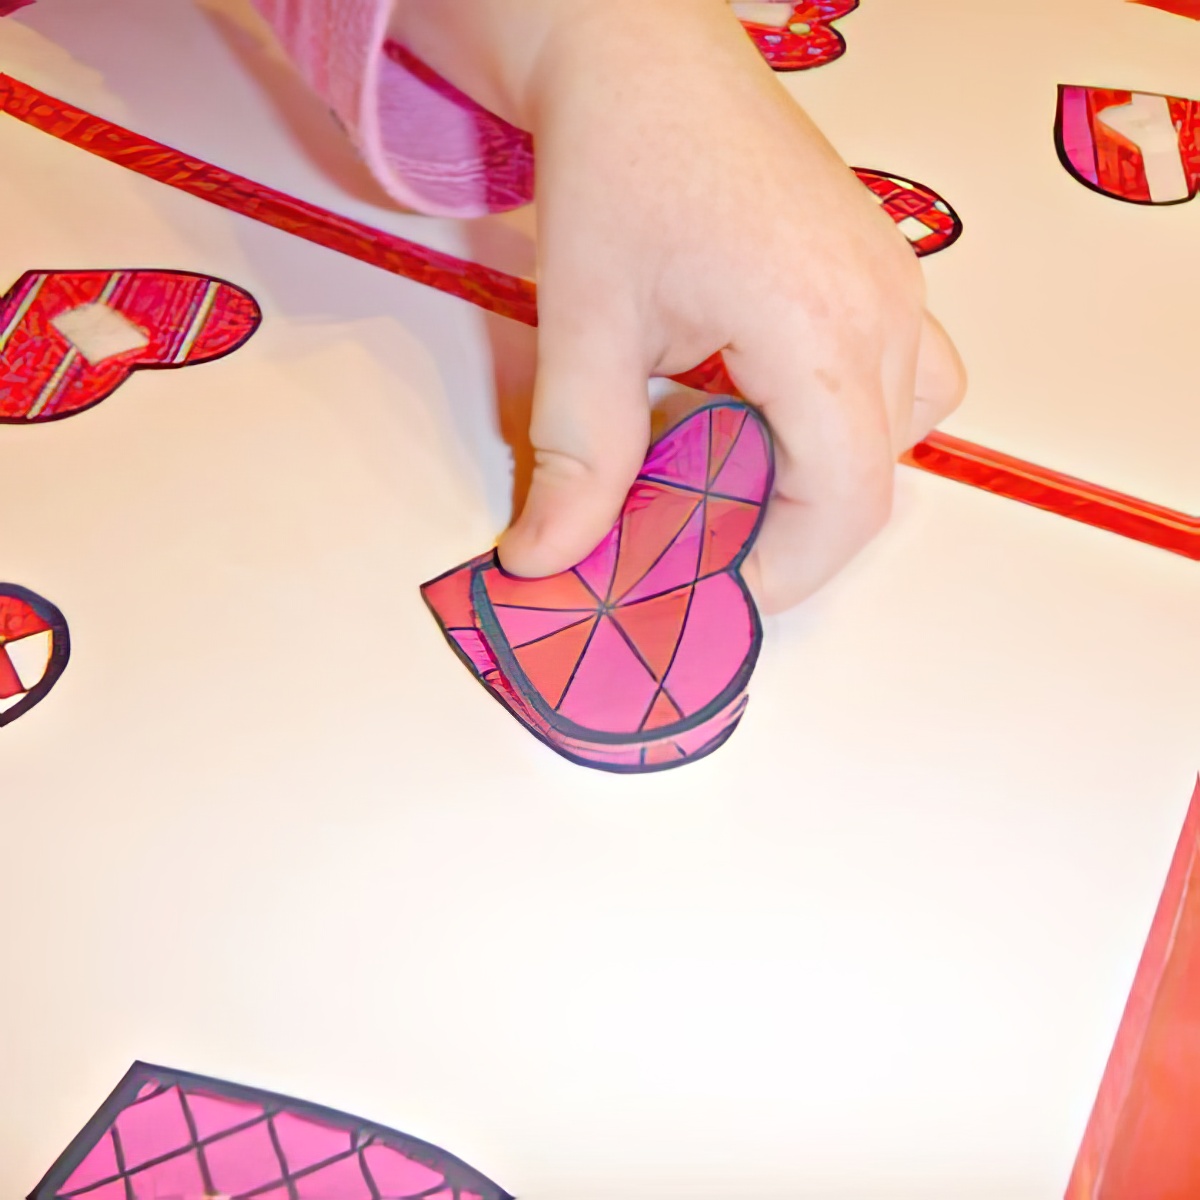 little-hand-working-heart-puzzle file folder game for the kids!